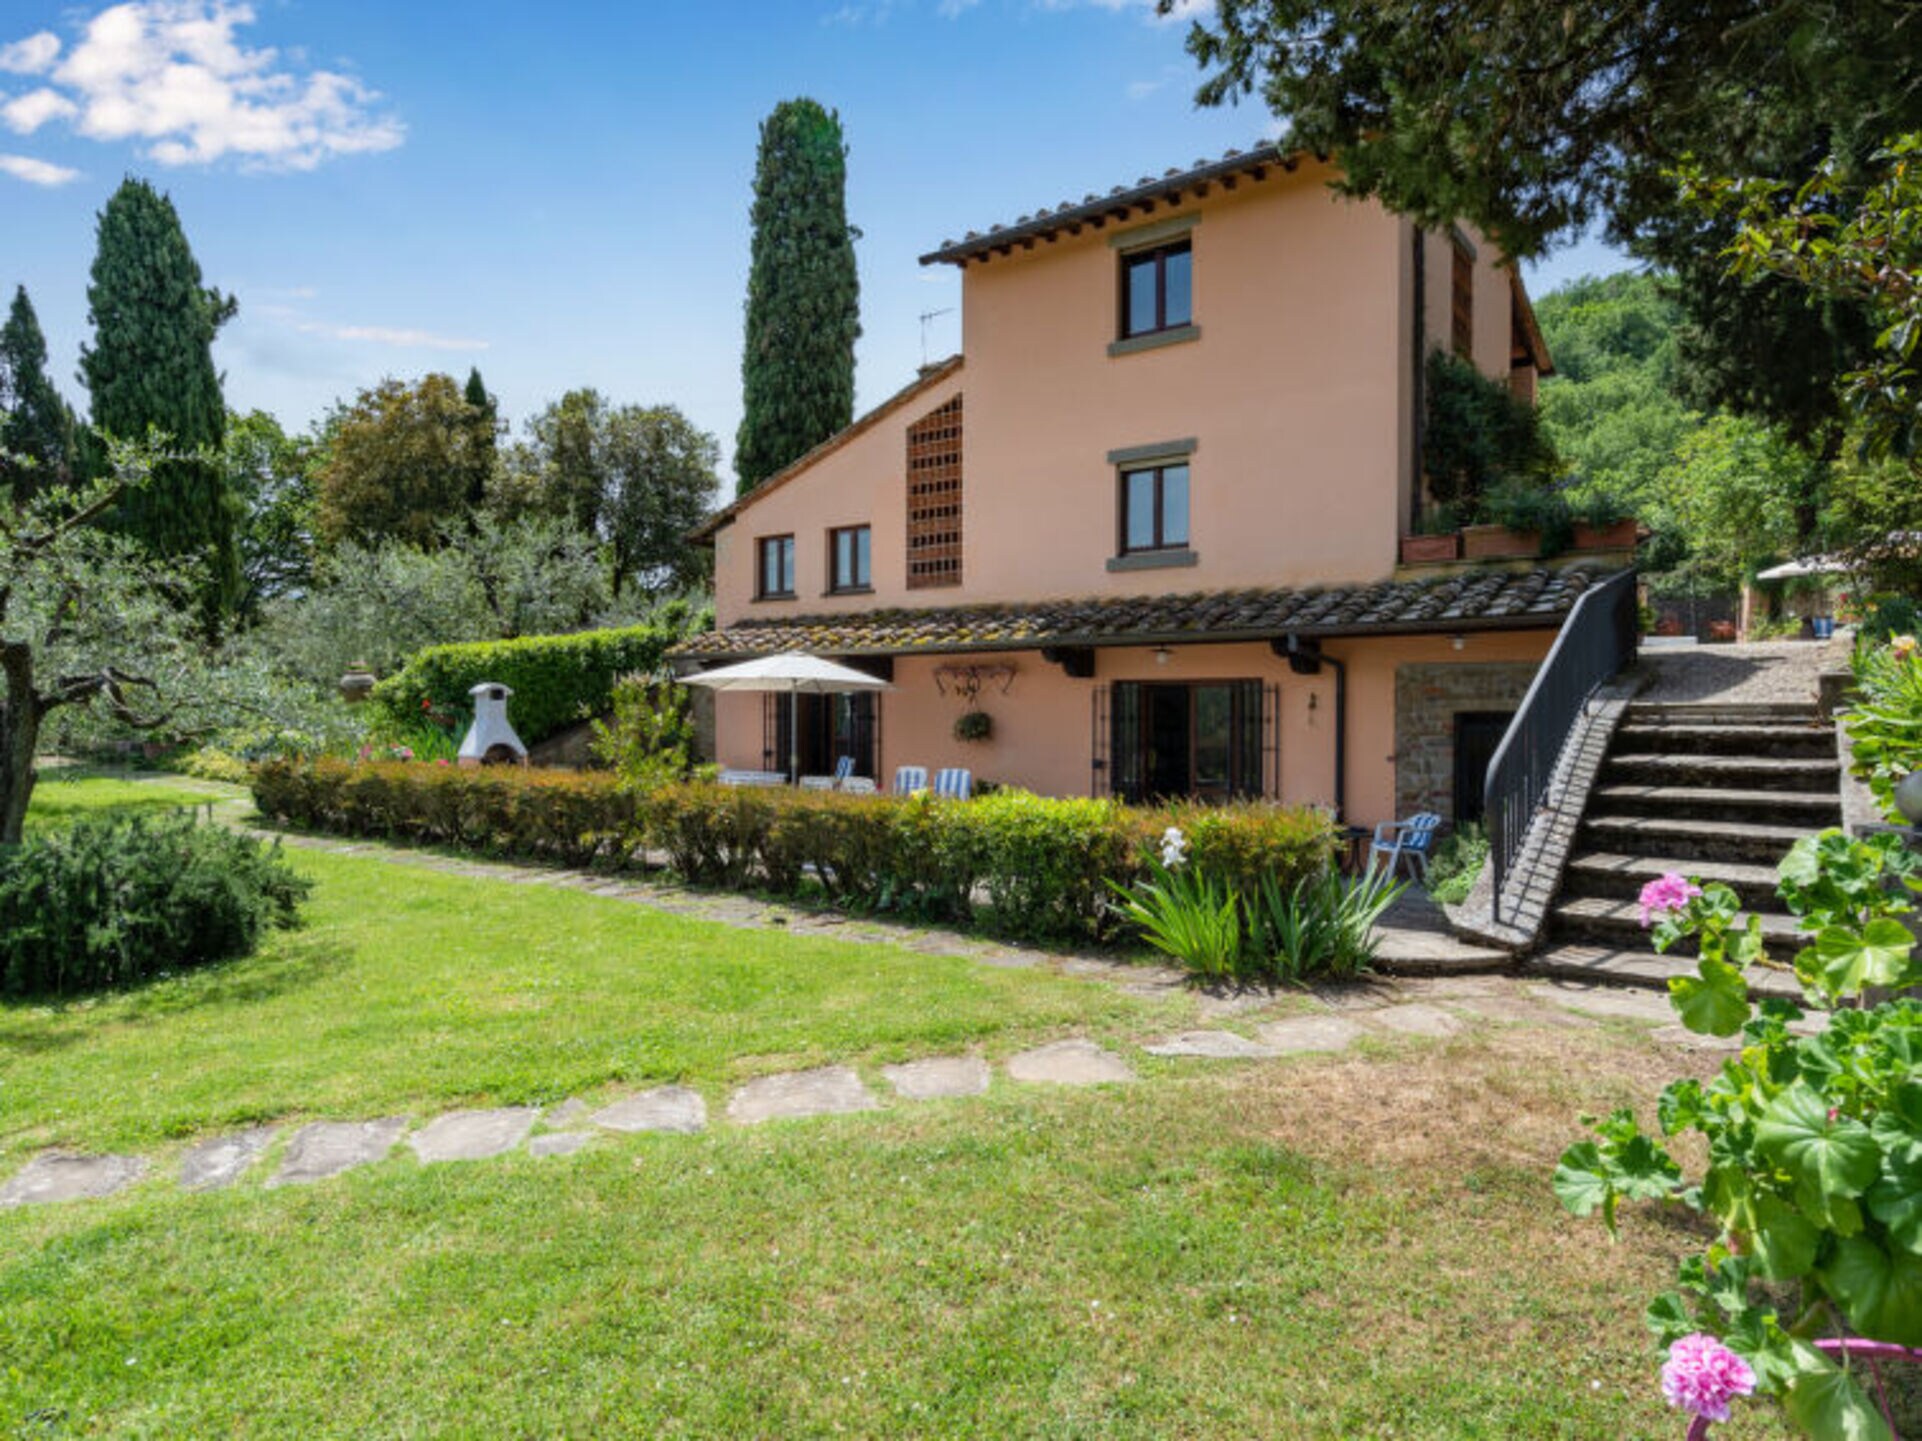 Property Image 2 - Property Manager Villa with First Class Amenities, Arezzo Villa 1005